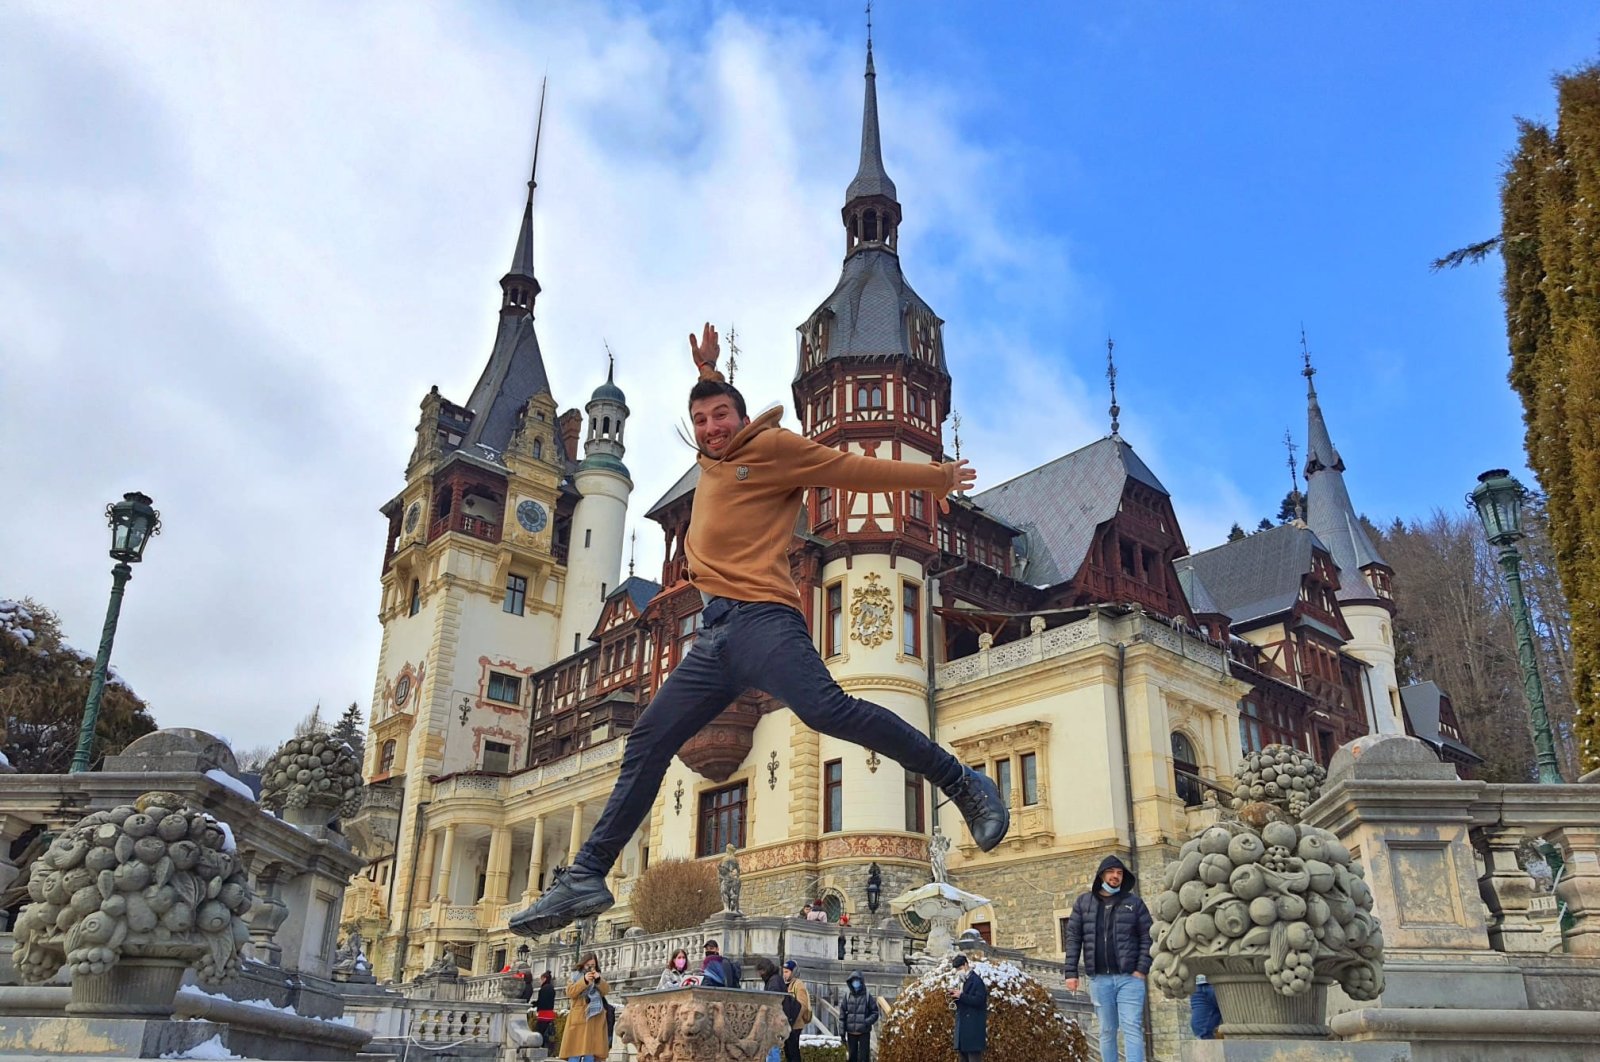 University student Erkan Orhan, 24, has visited 120 cities in 14 countries by hitchhiking, Sinaia, Romania, May 9, 2022. (DHA Photo)